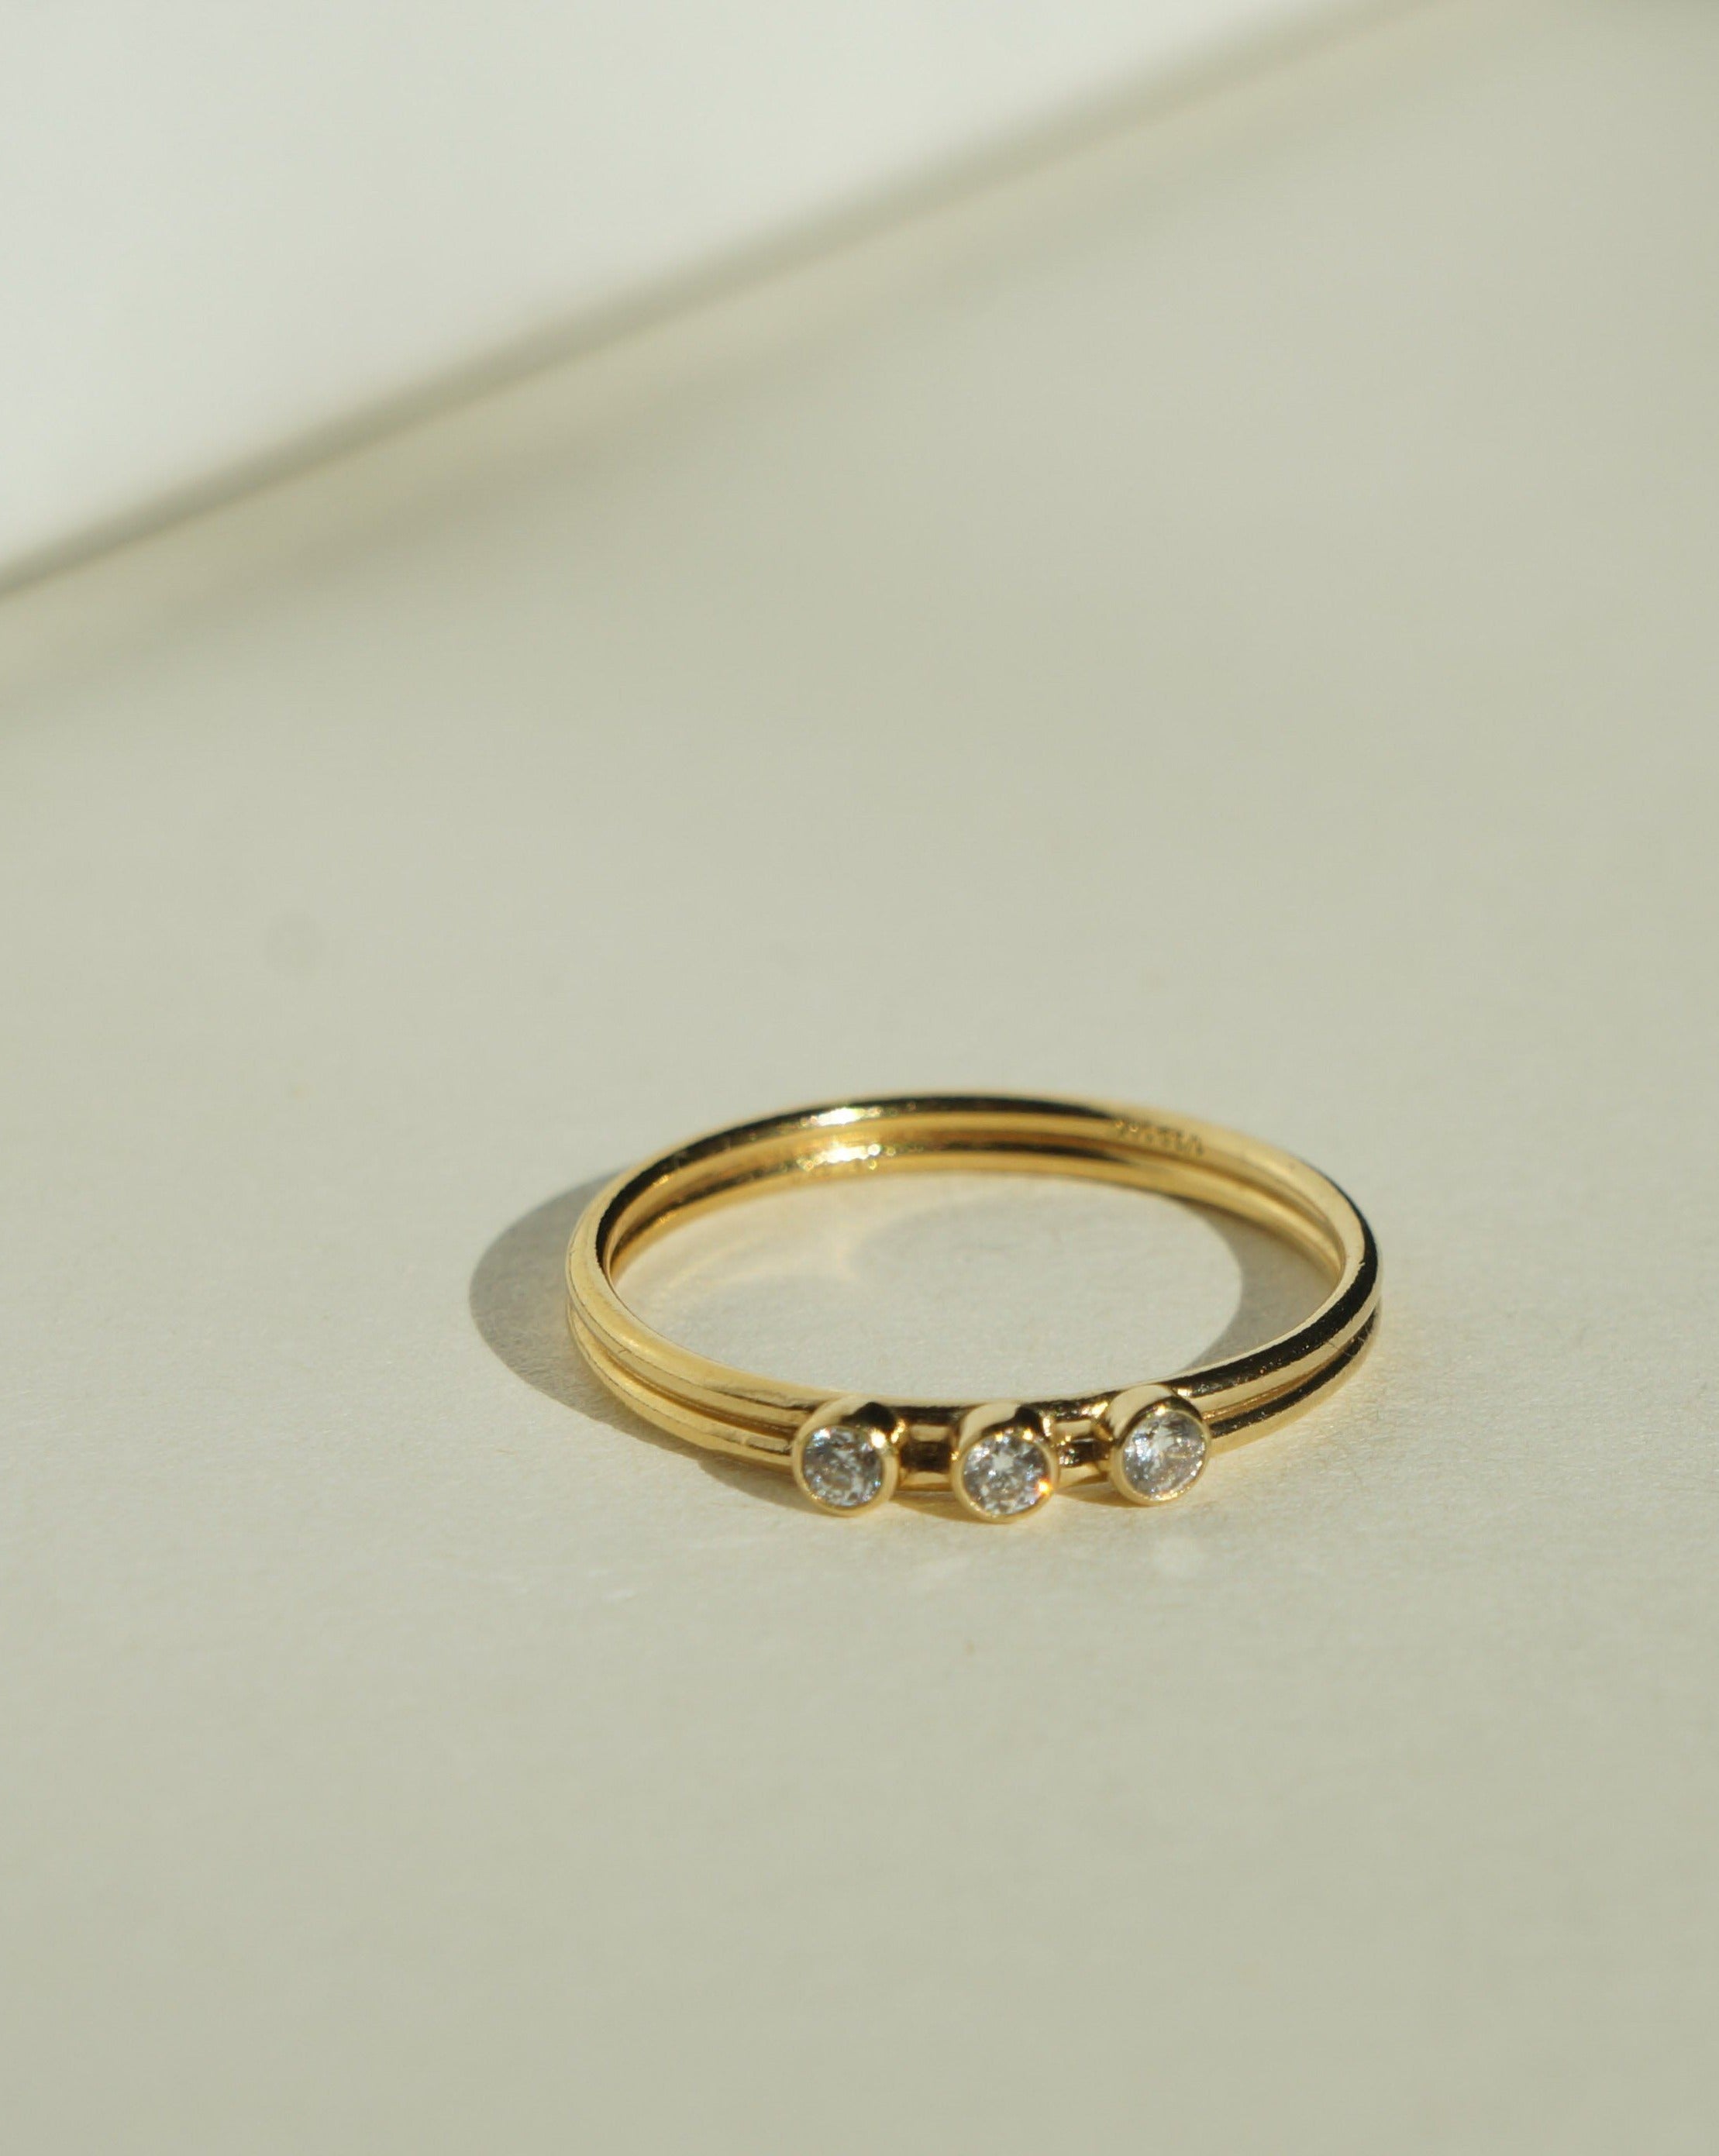 Tres Dia Ring by KOZAKH. A 1mm double band, crafted in 14K Gold Filled, featuring three 2mm Cubic Zirconias.